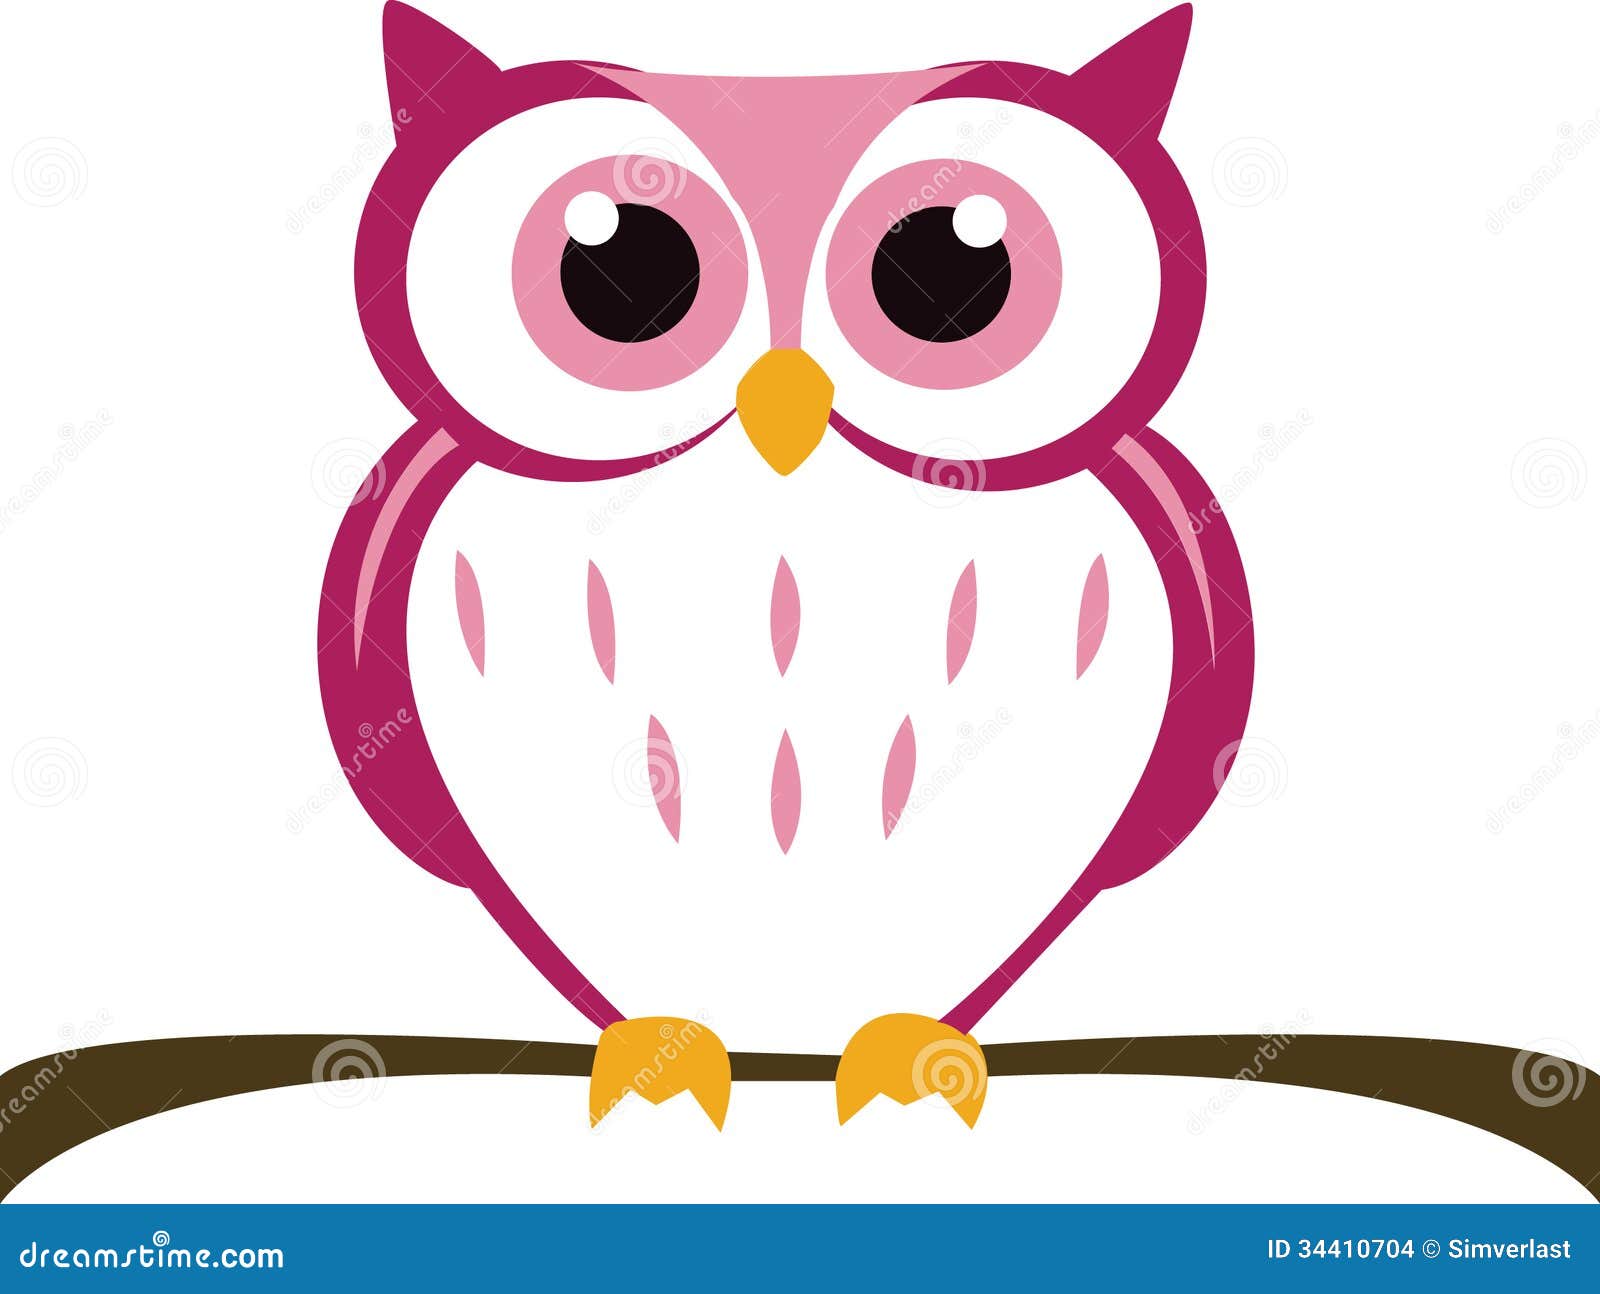 free vector clipart owl - photo #44